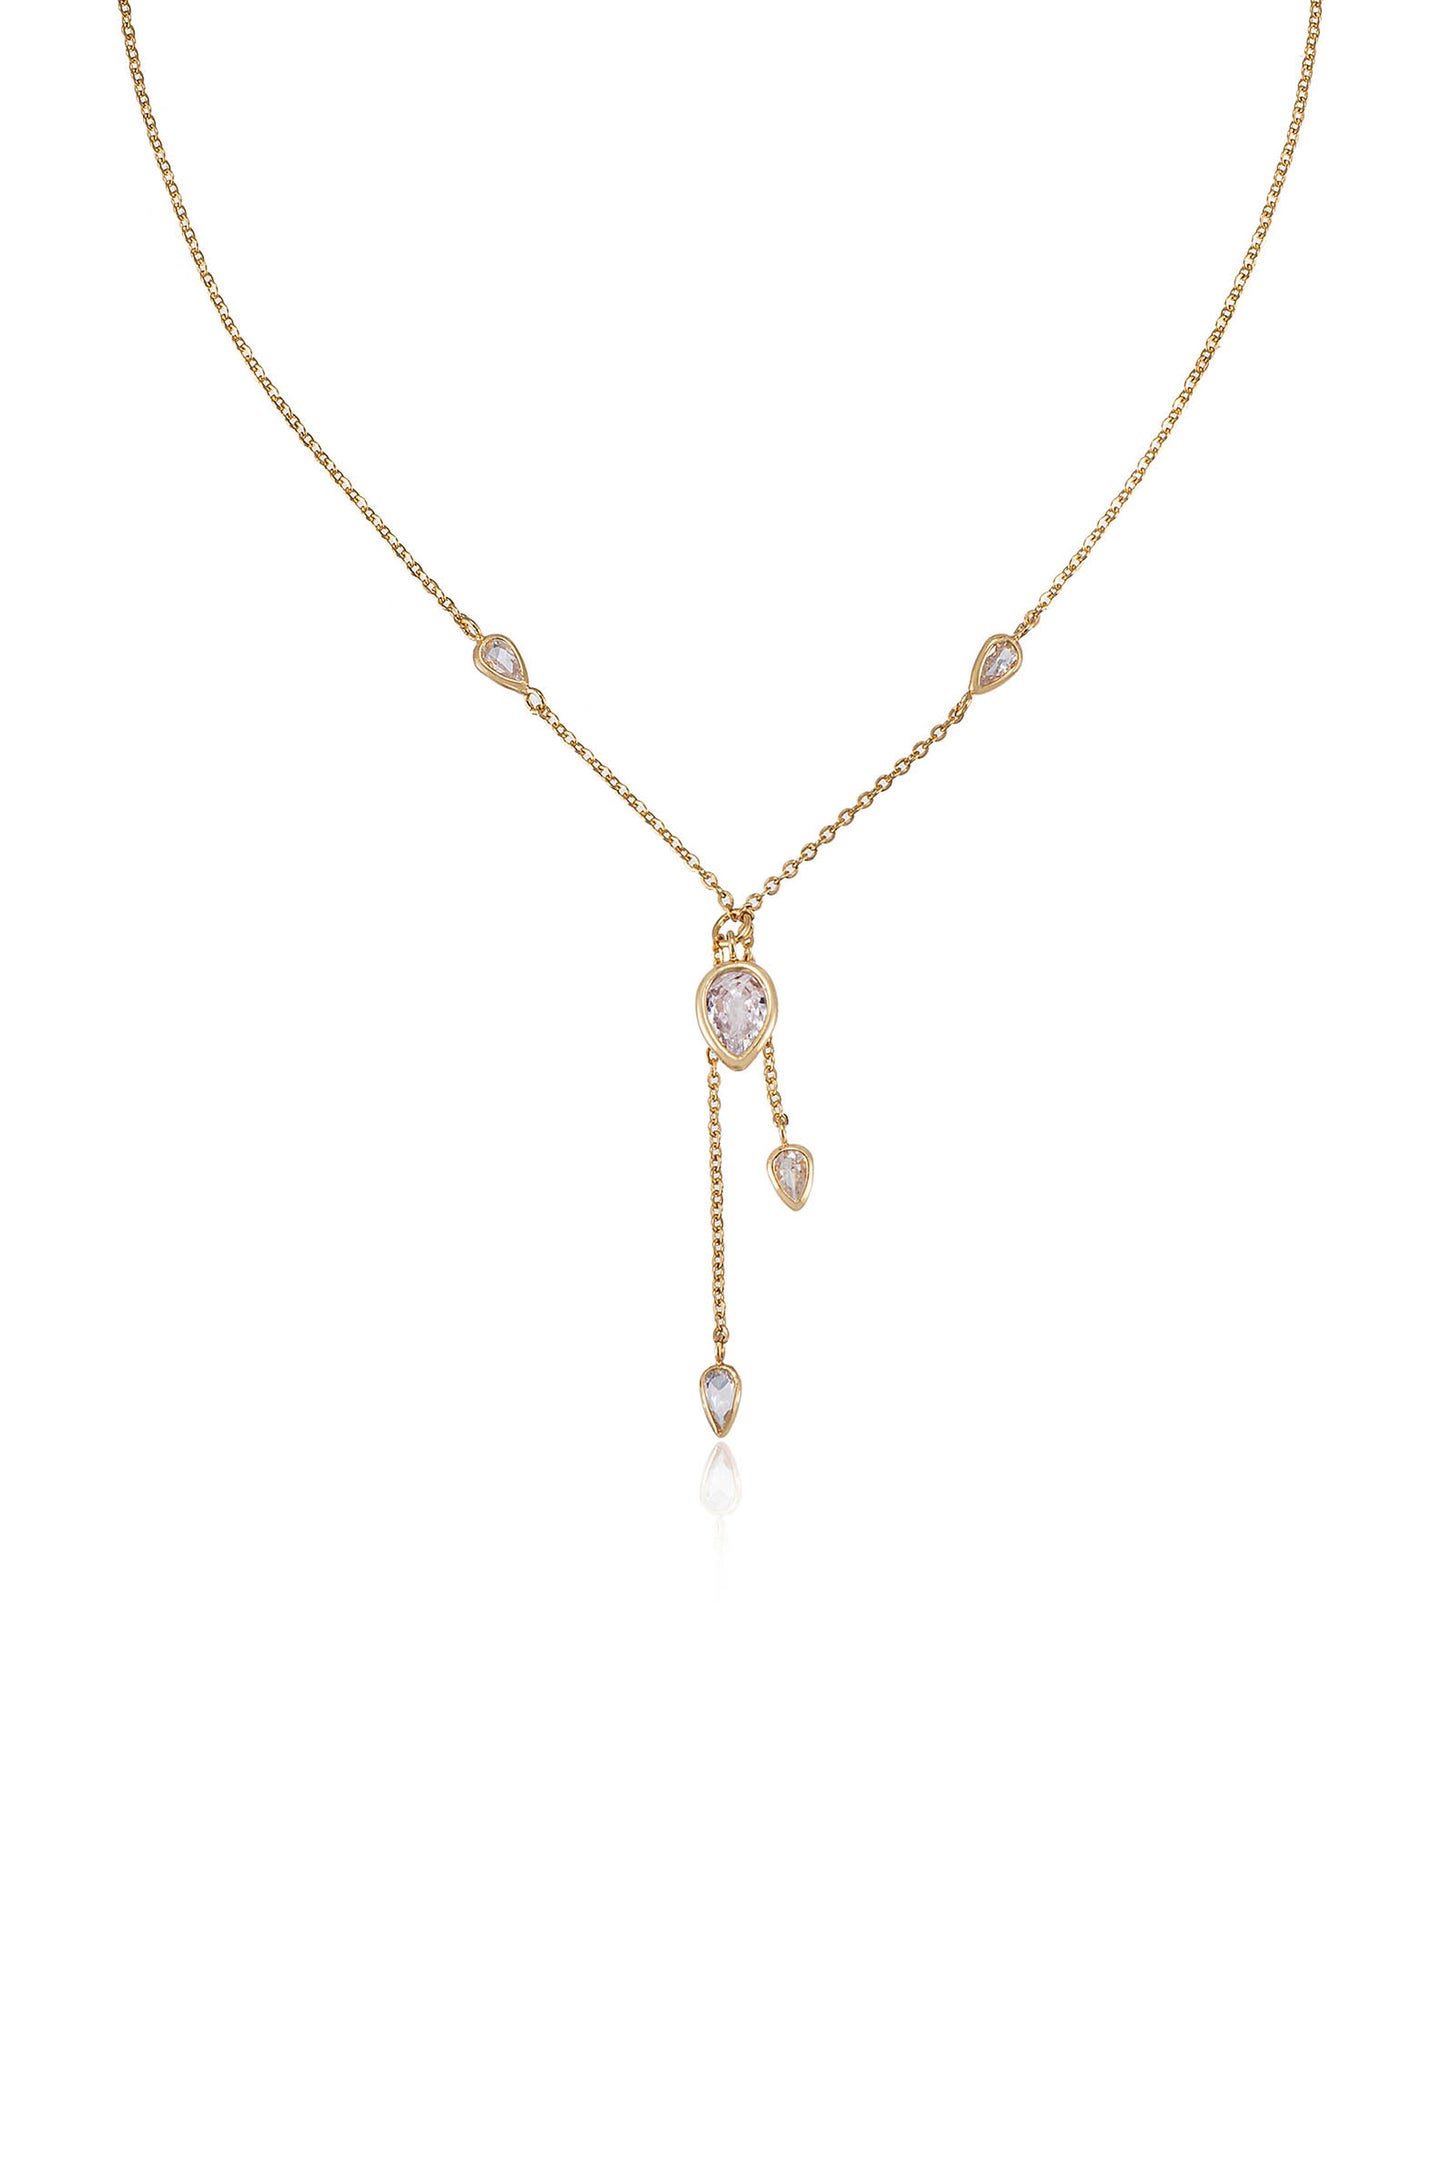 Dangling Bezel Crystal Chain 18k Gold Plated Lariat Necklace